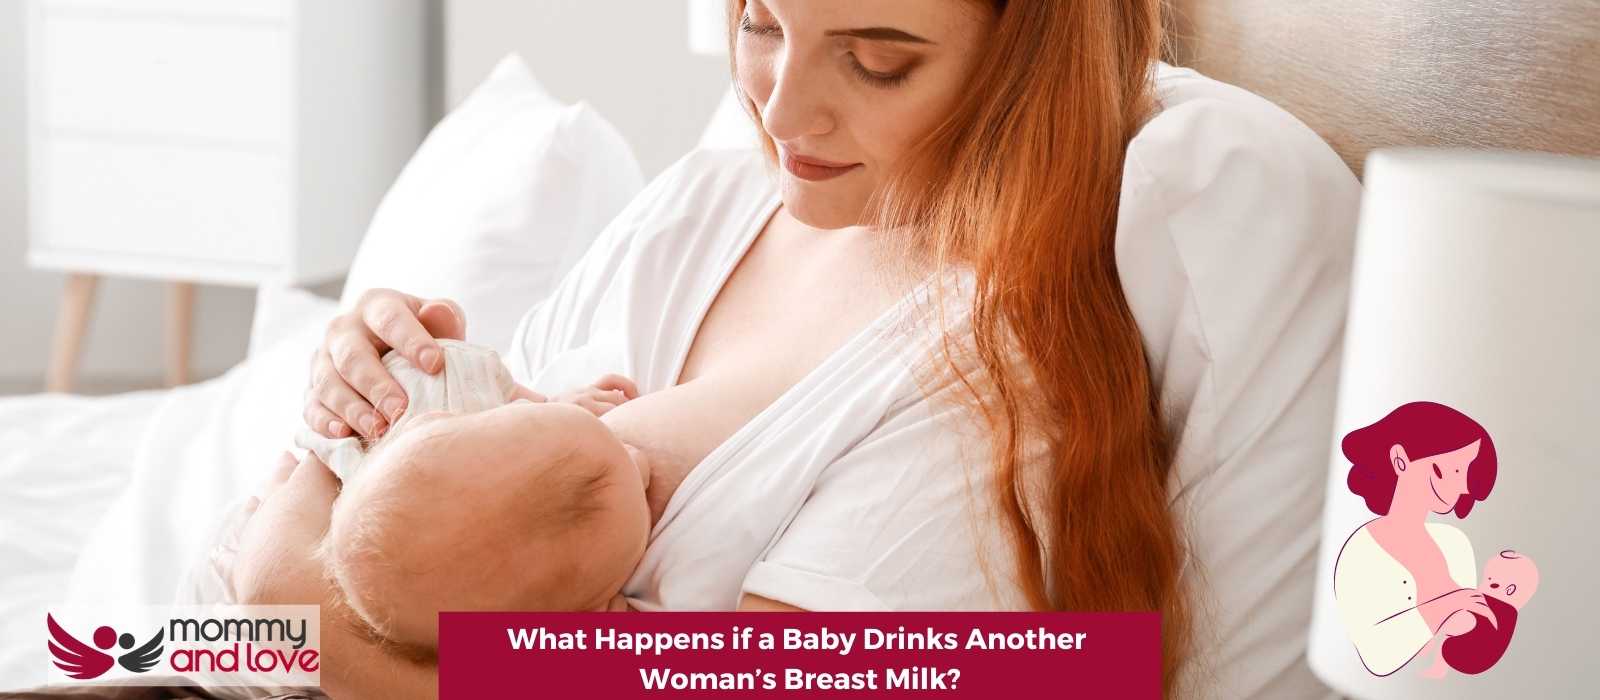 What Happens if a Baby Drinks Another Woman’s Breast Milk